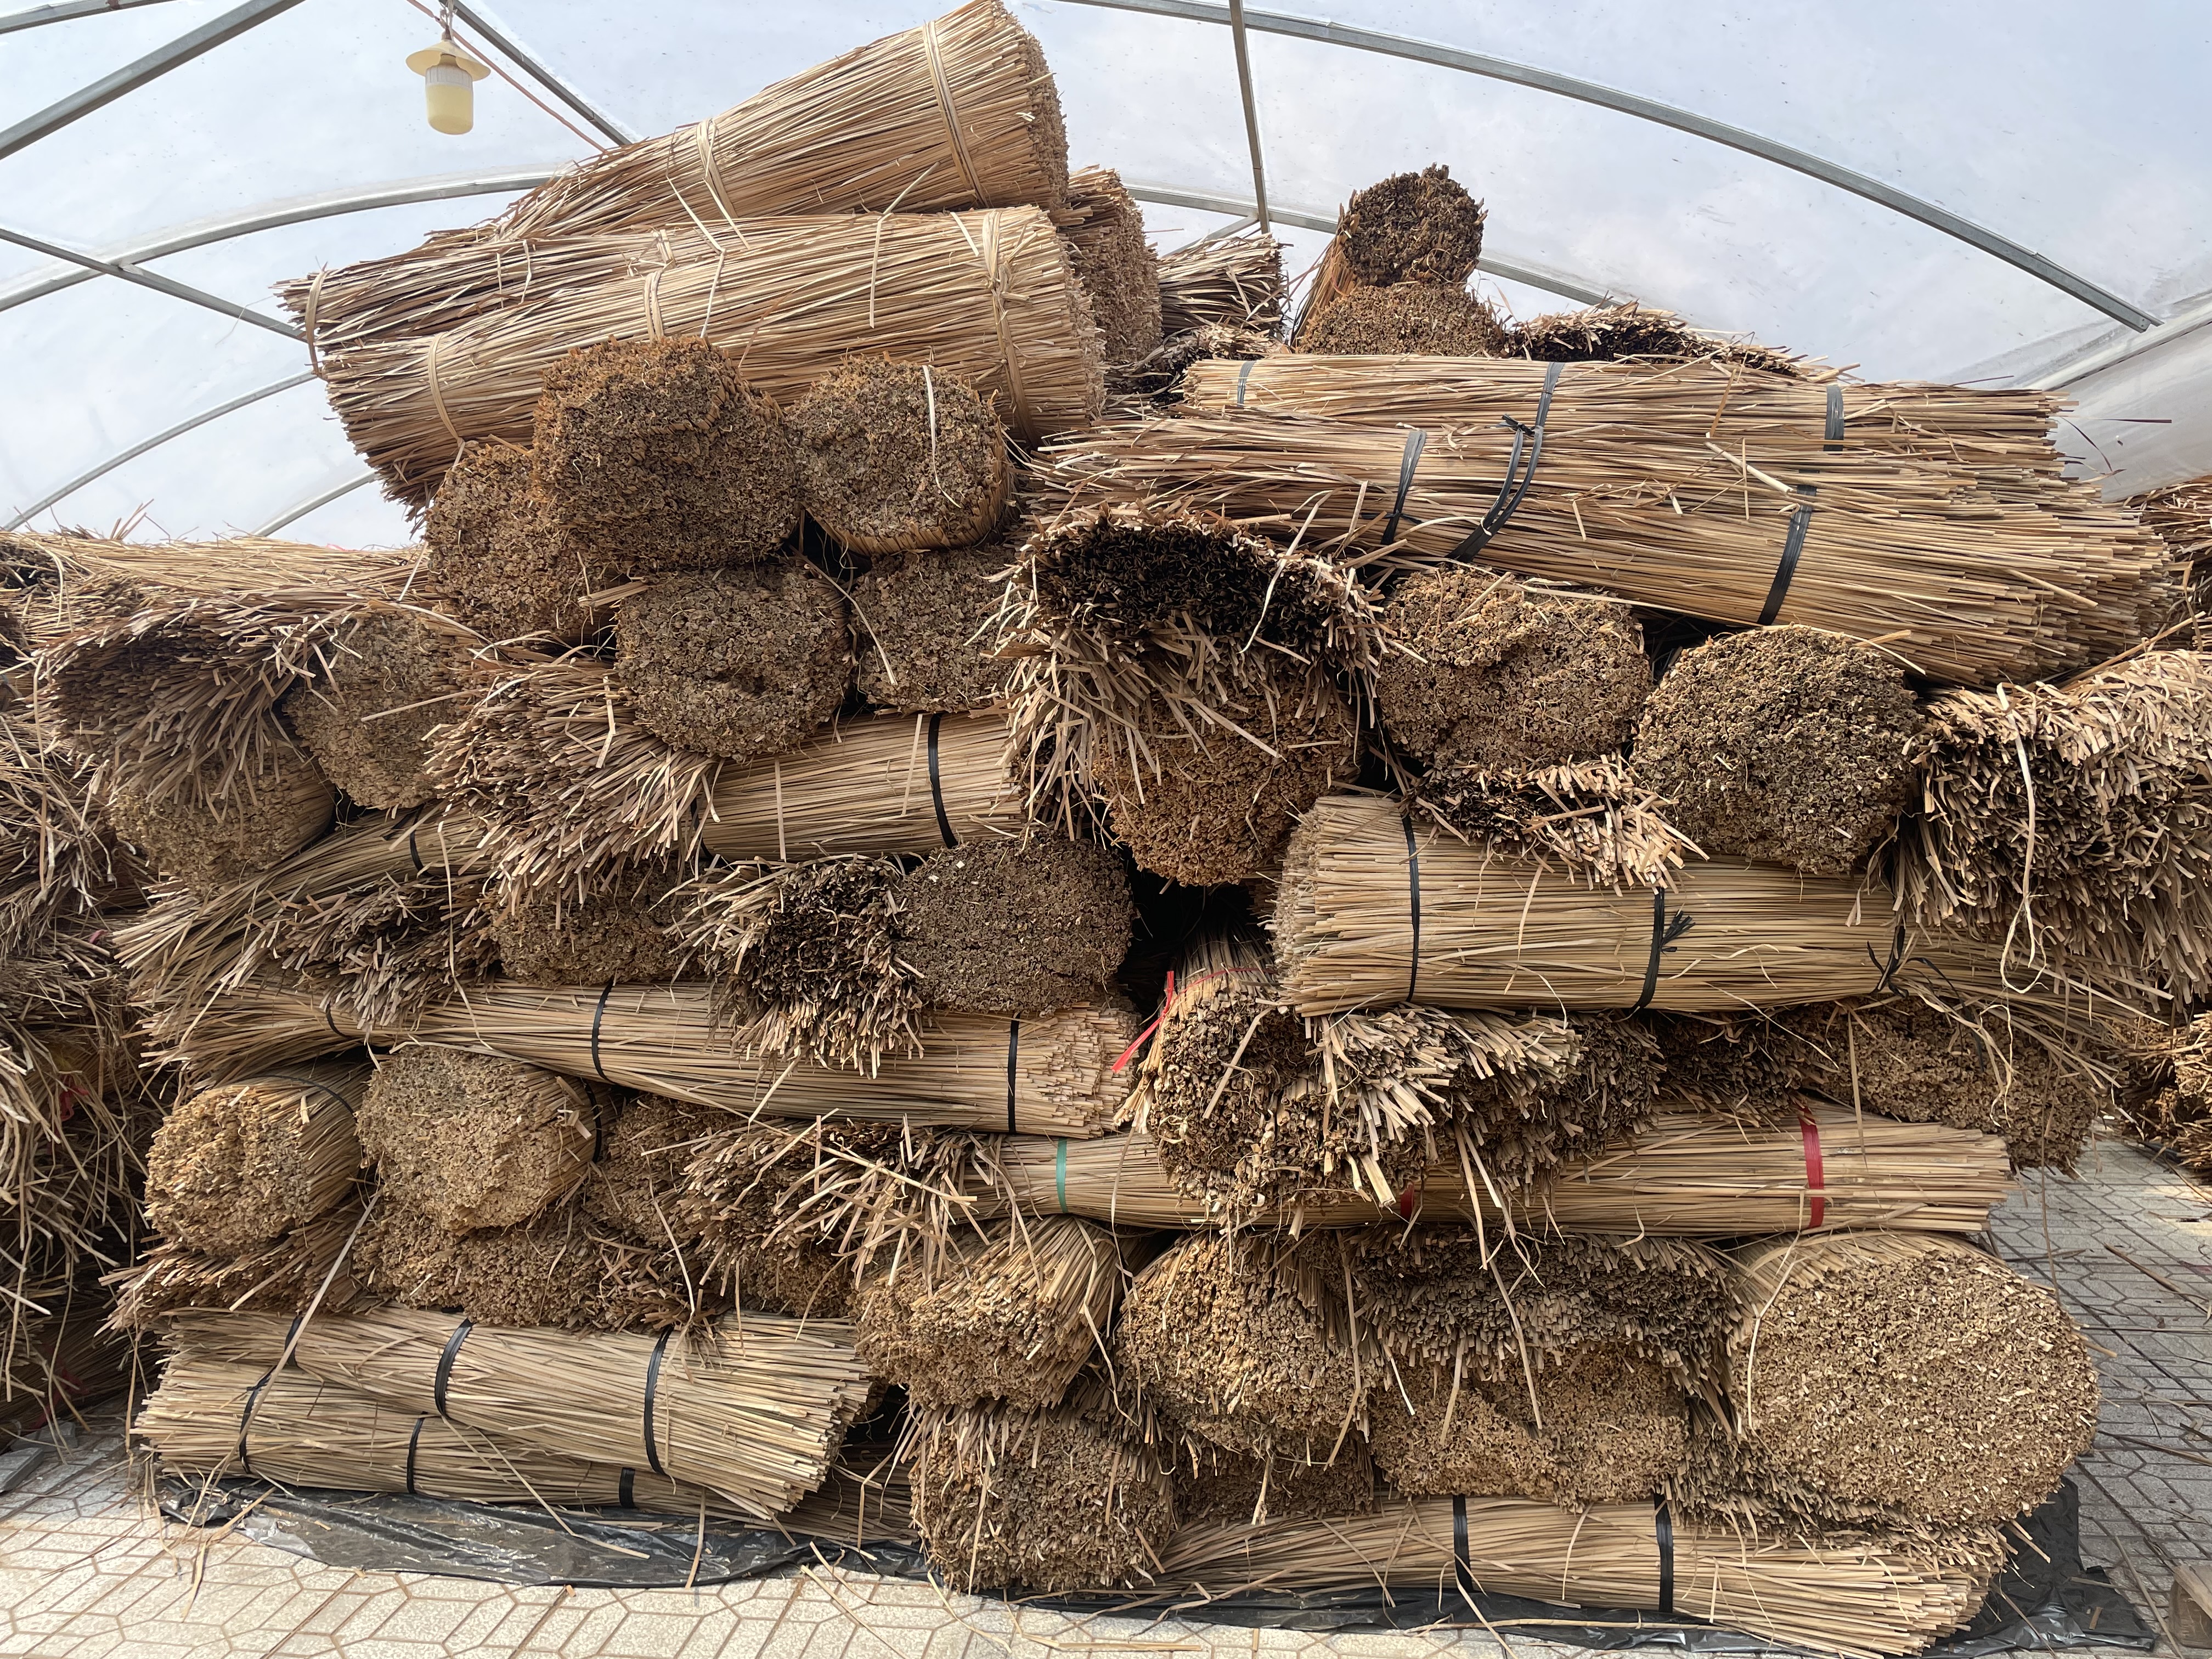 Dried grass used for crafting in Nga Nam Town, Soc Trang Province. Photo: Minh Khoi / Tuoi Tre